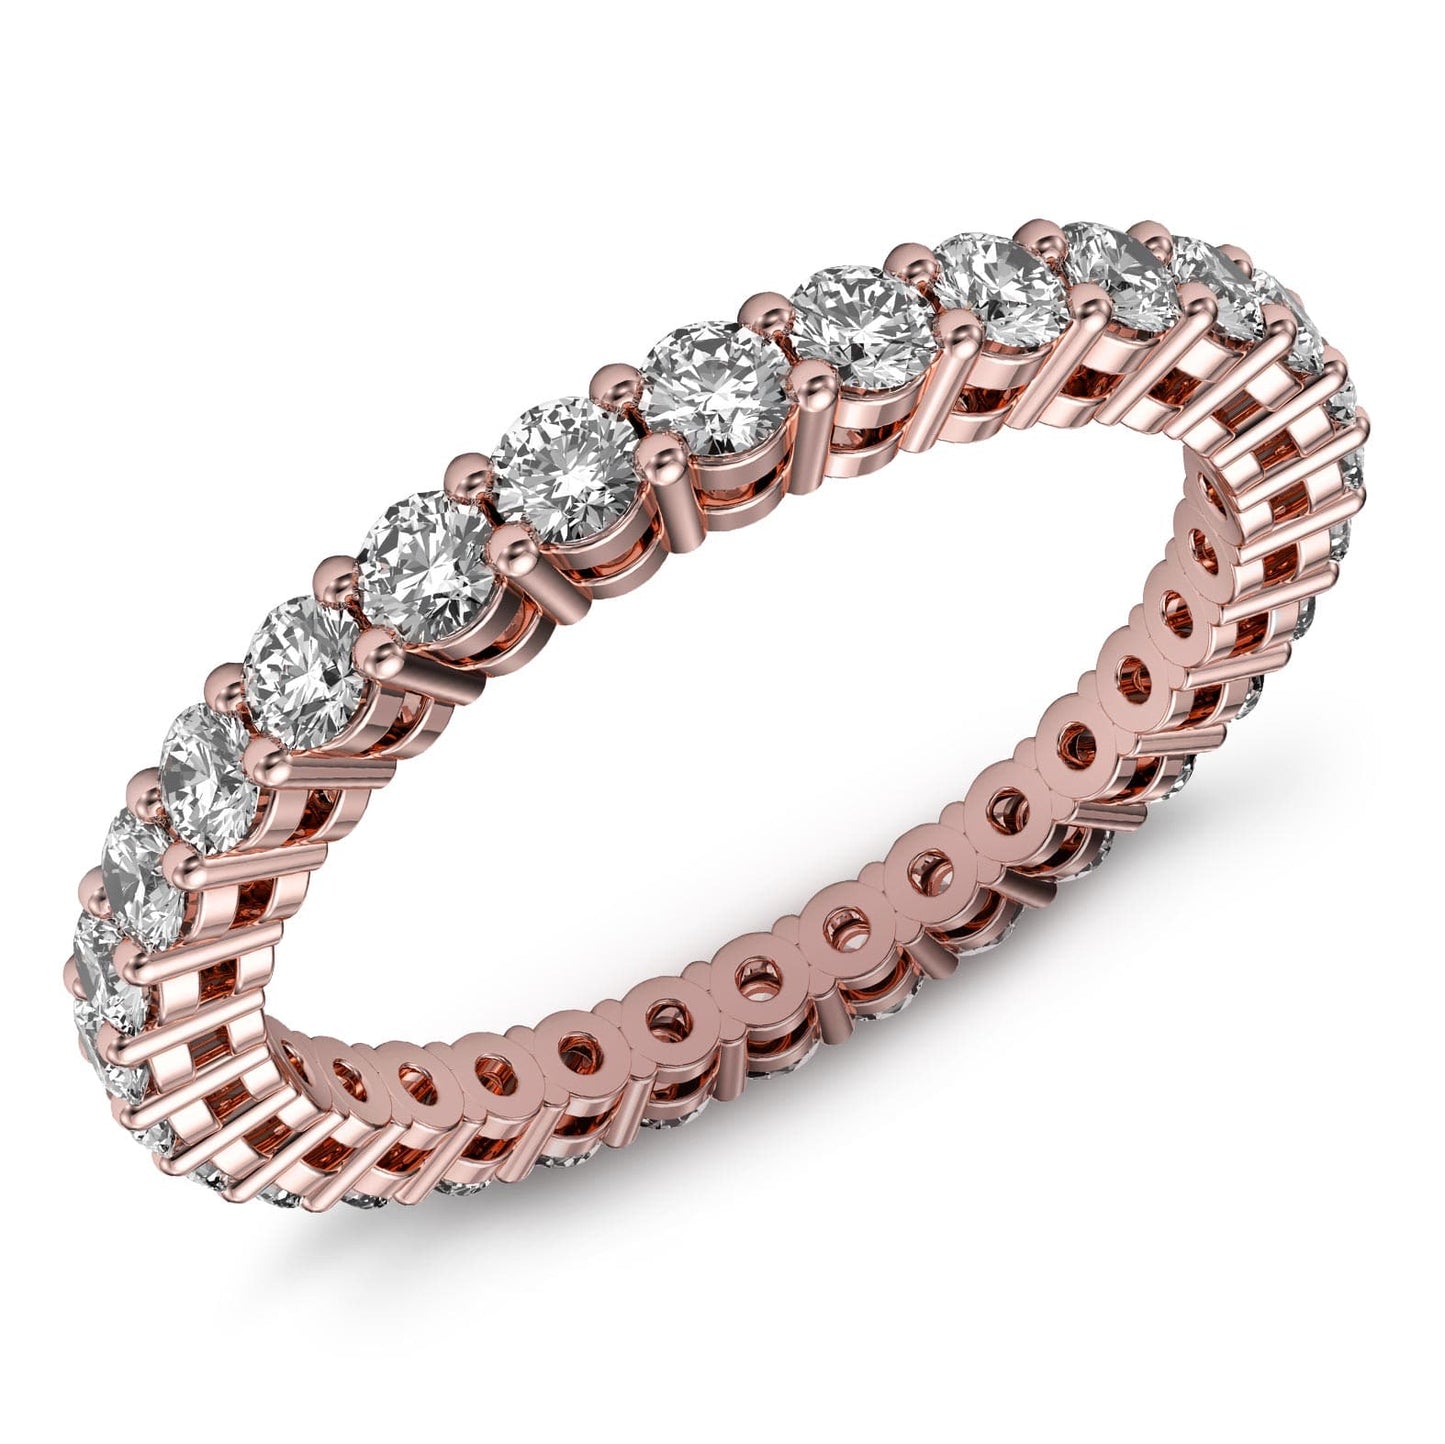 1.5ct Classic Prong Diamond Eternity Ring in 14k Gold